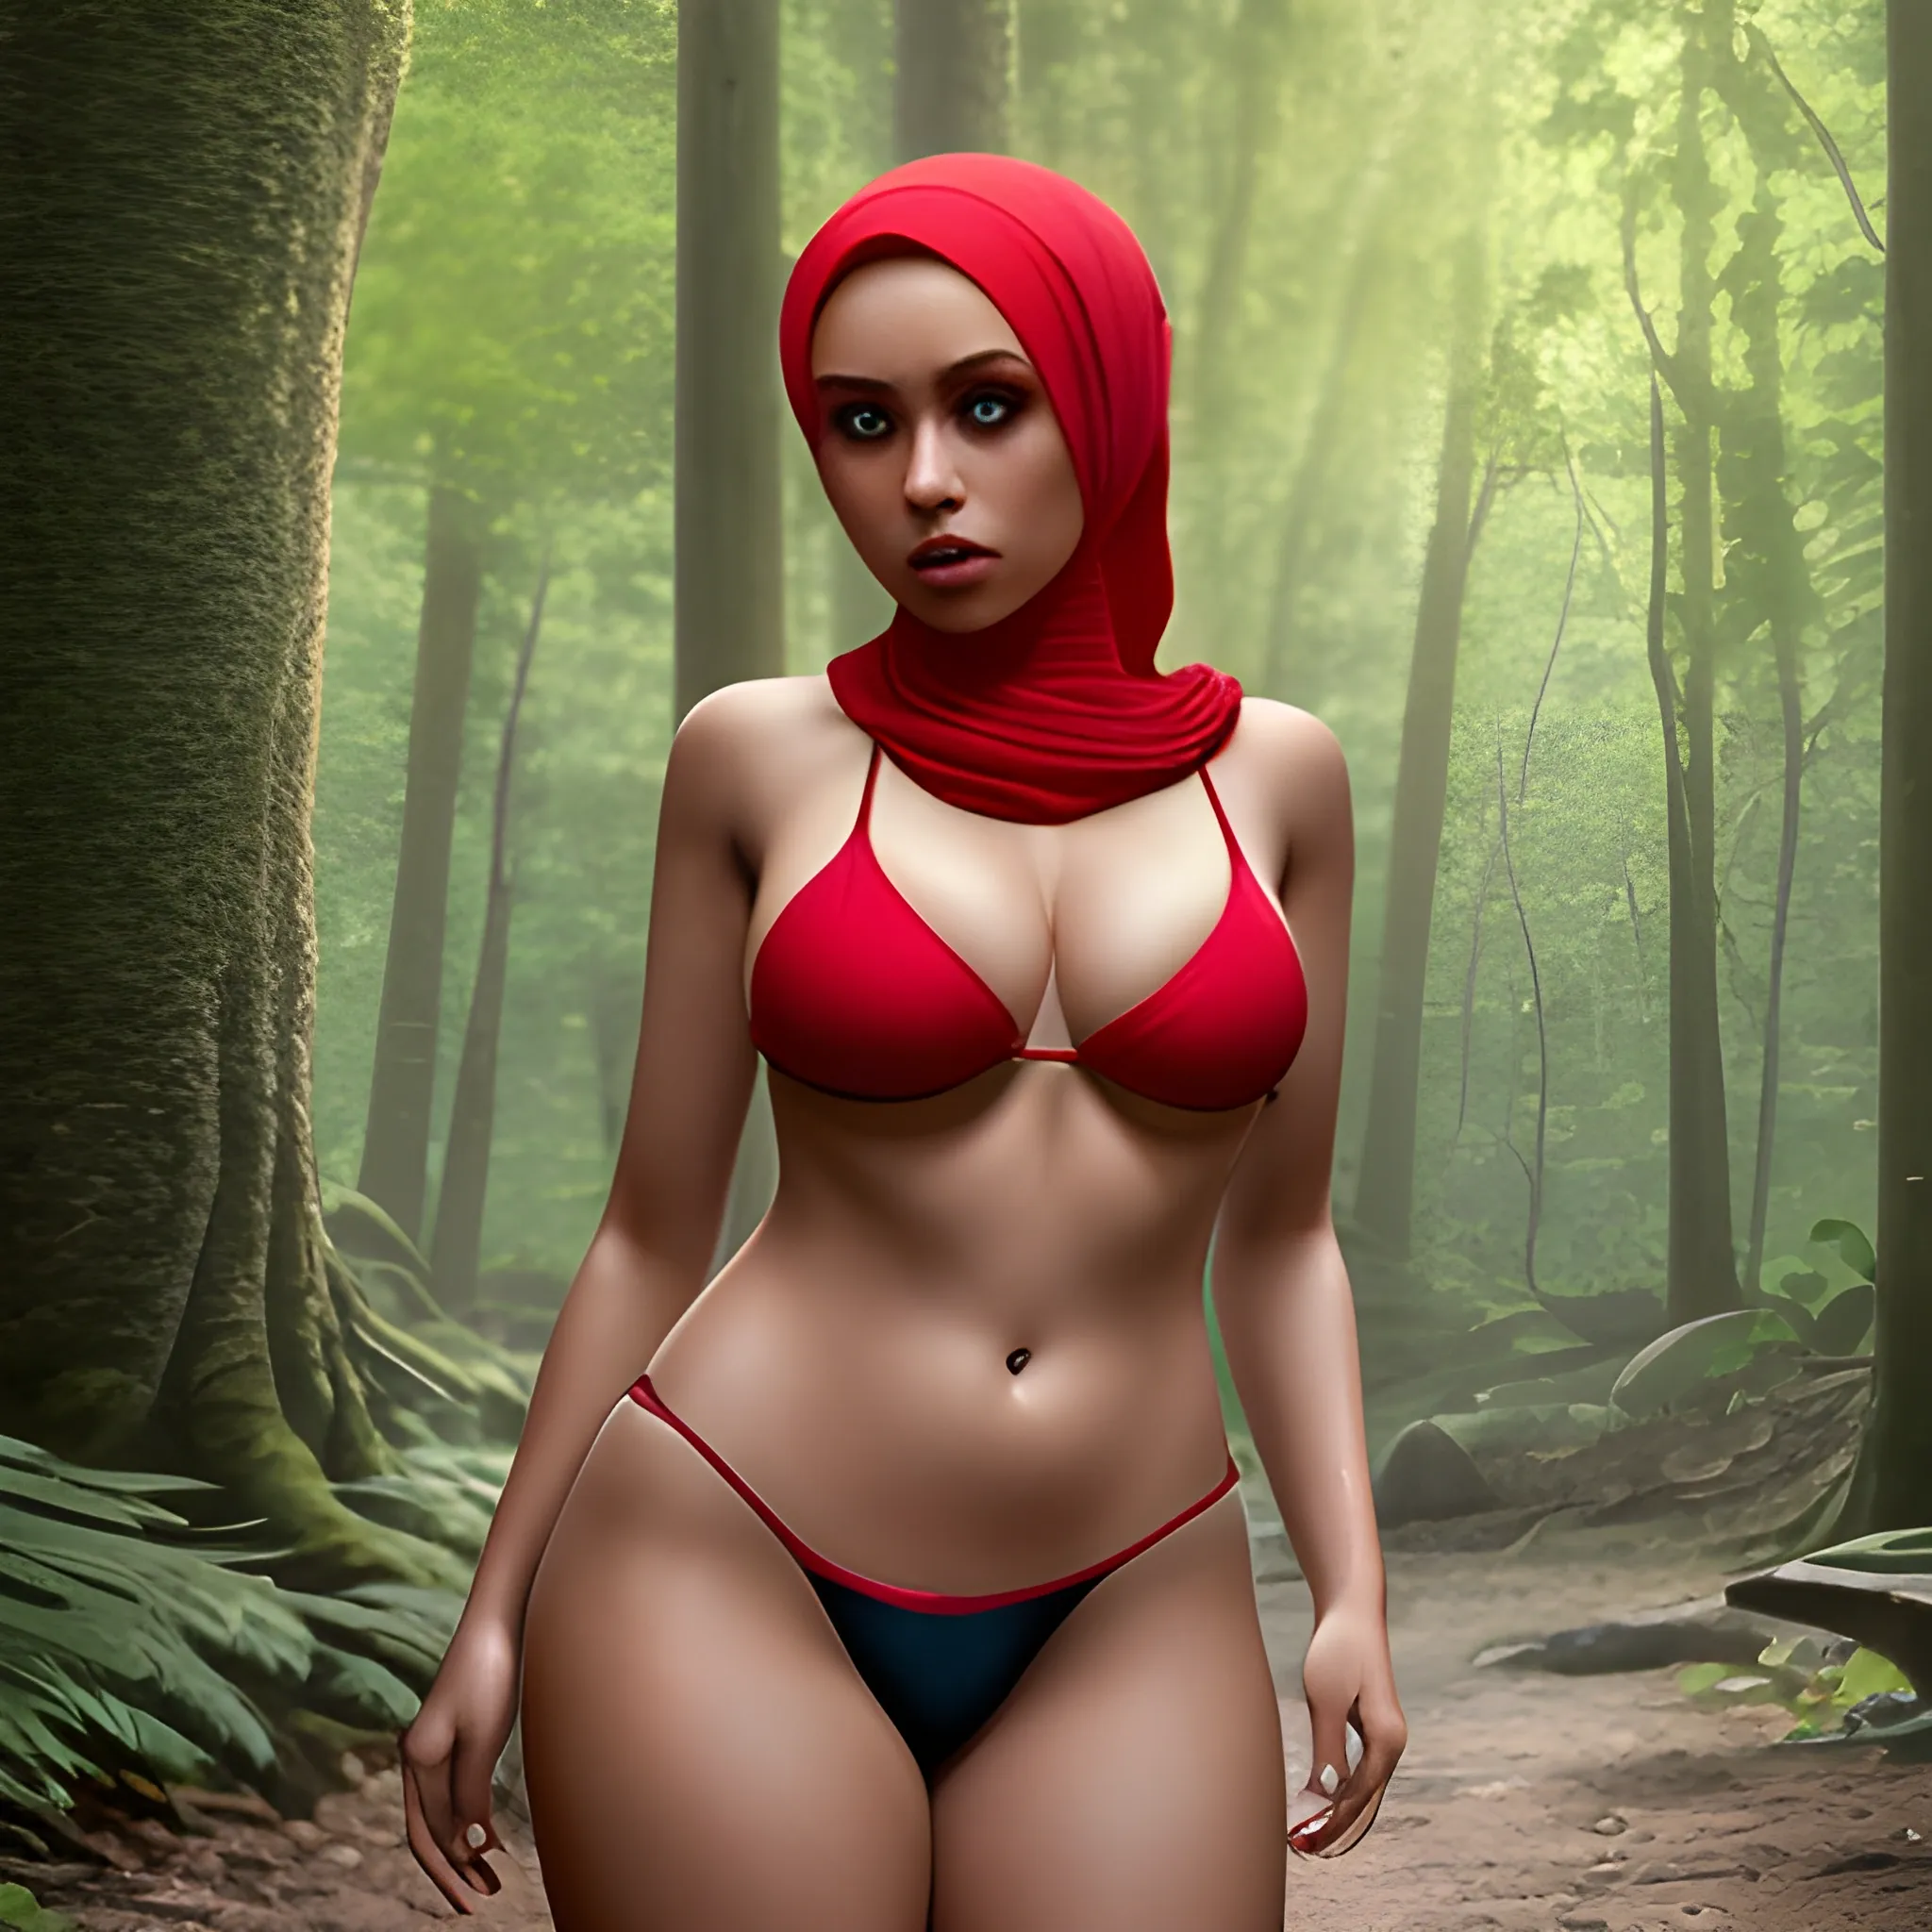 a beautiful woman in a forest, wearing hijab, looking_at camera